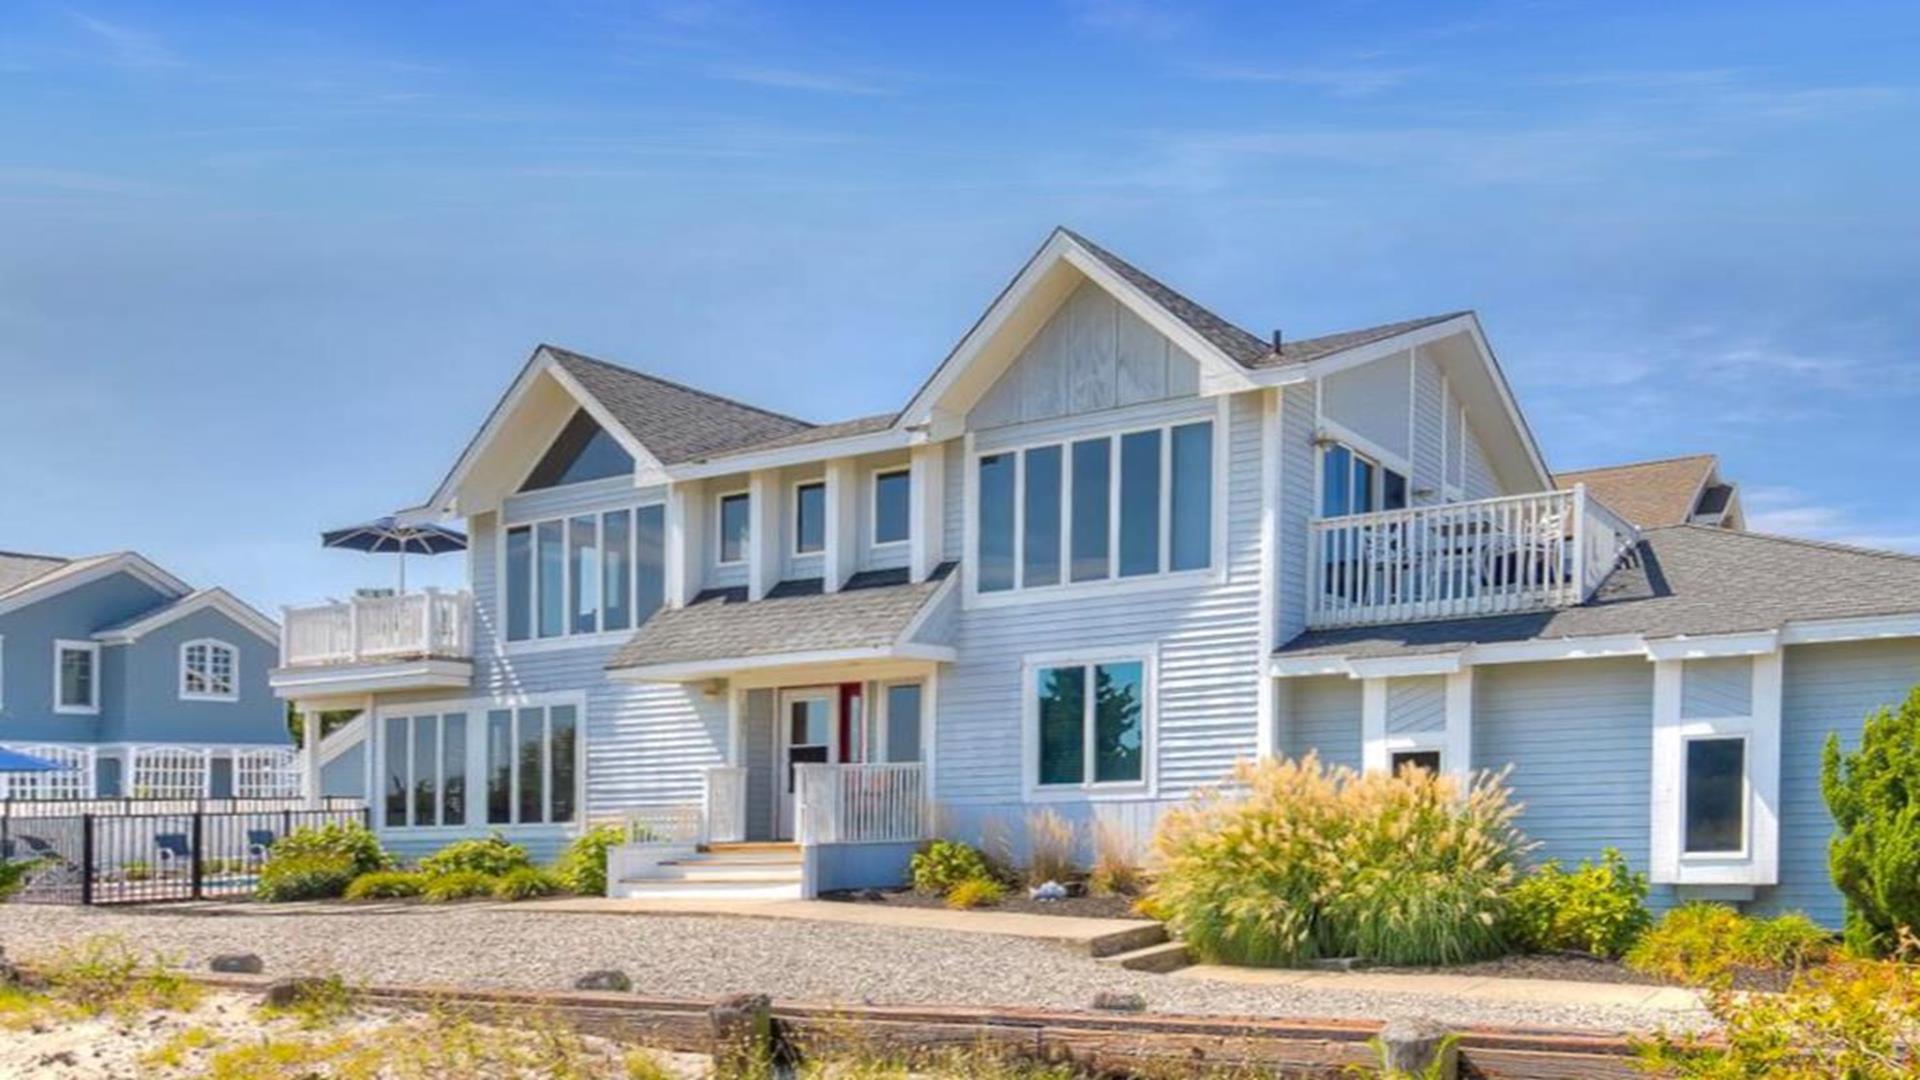 Great OCEAN FRONT home for your summer vacation